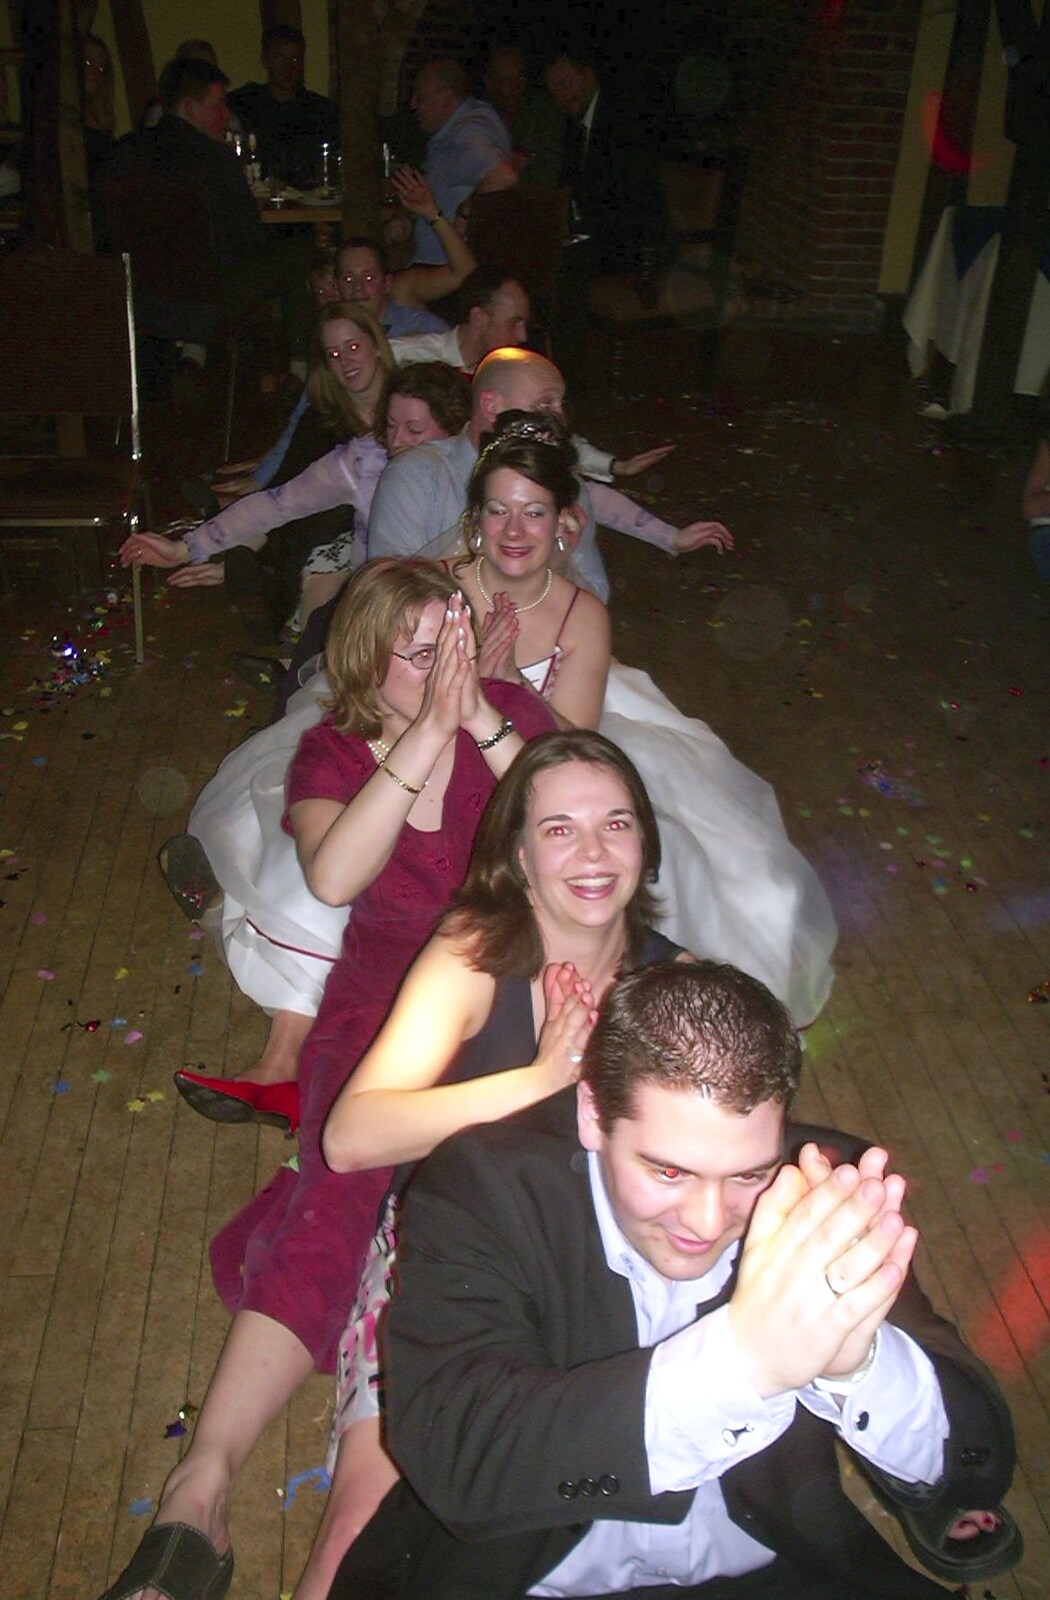 Oops Upside Your Head from Mikey-P and Clare's Wedding Reception, Brome Grange, Suffolk - 20th March 2004